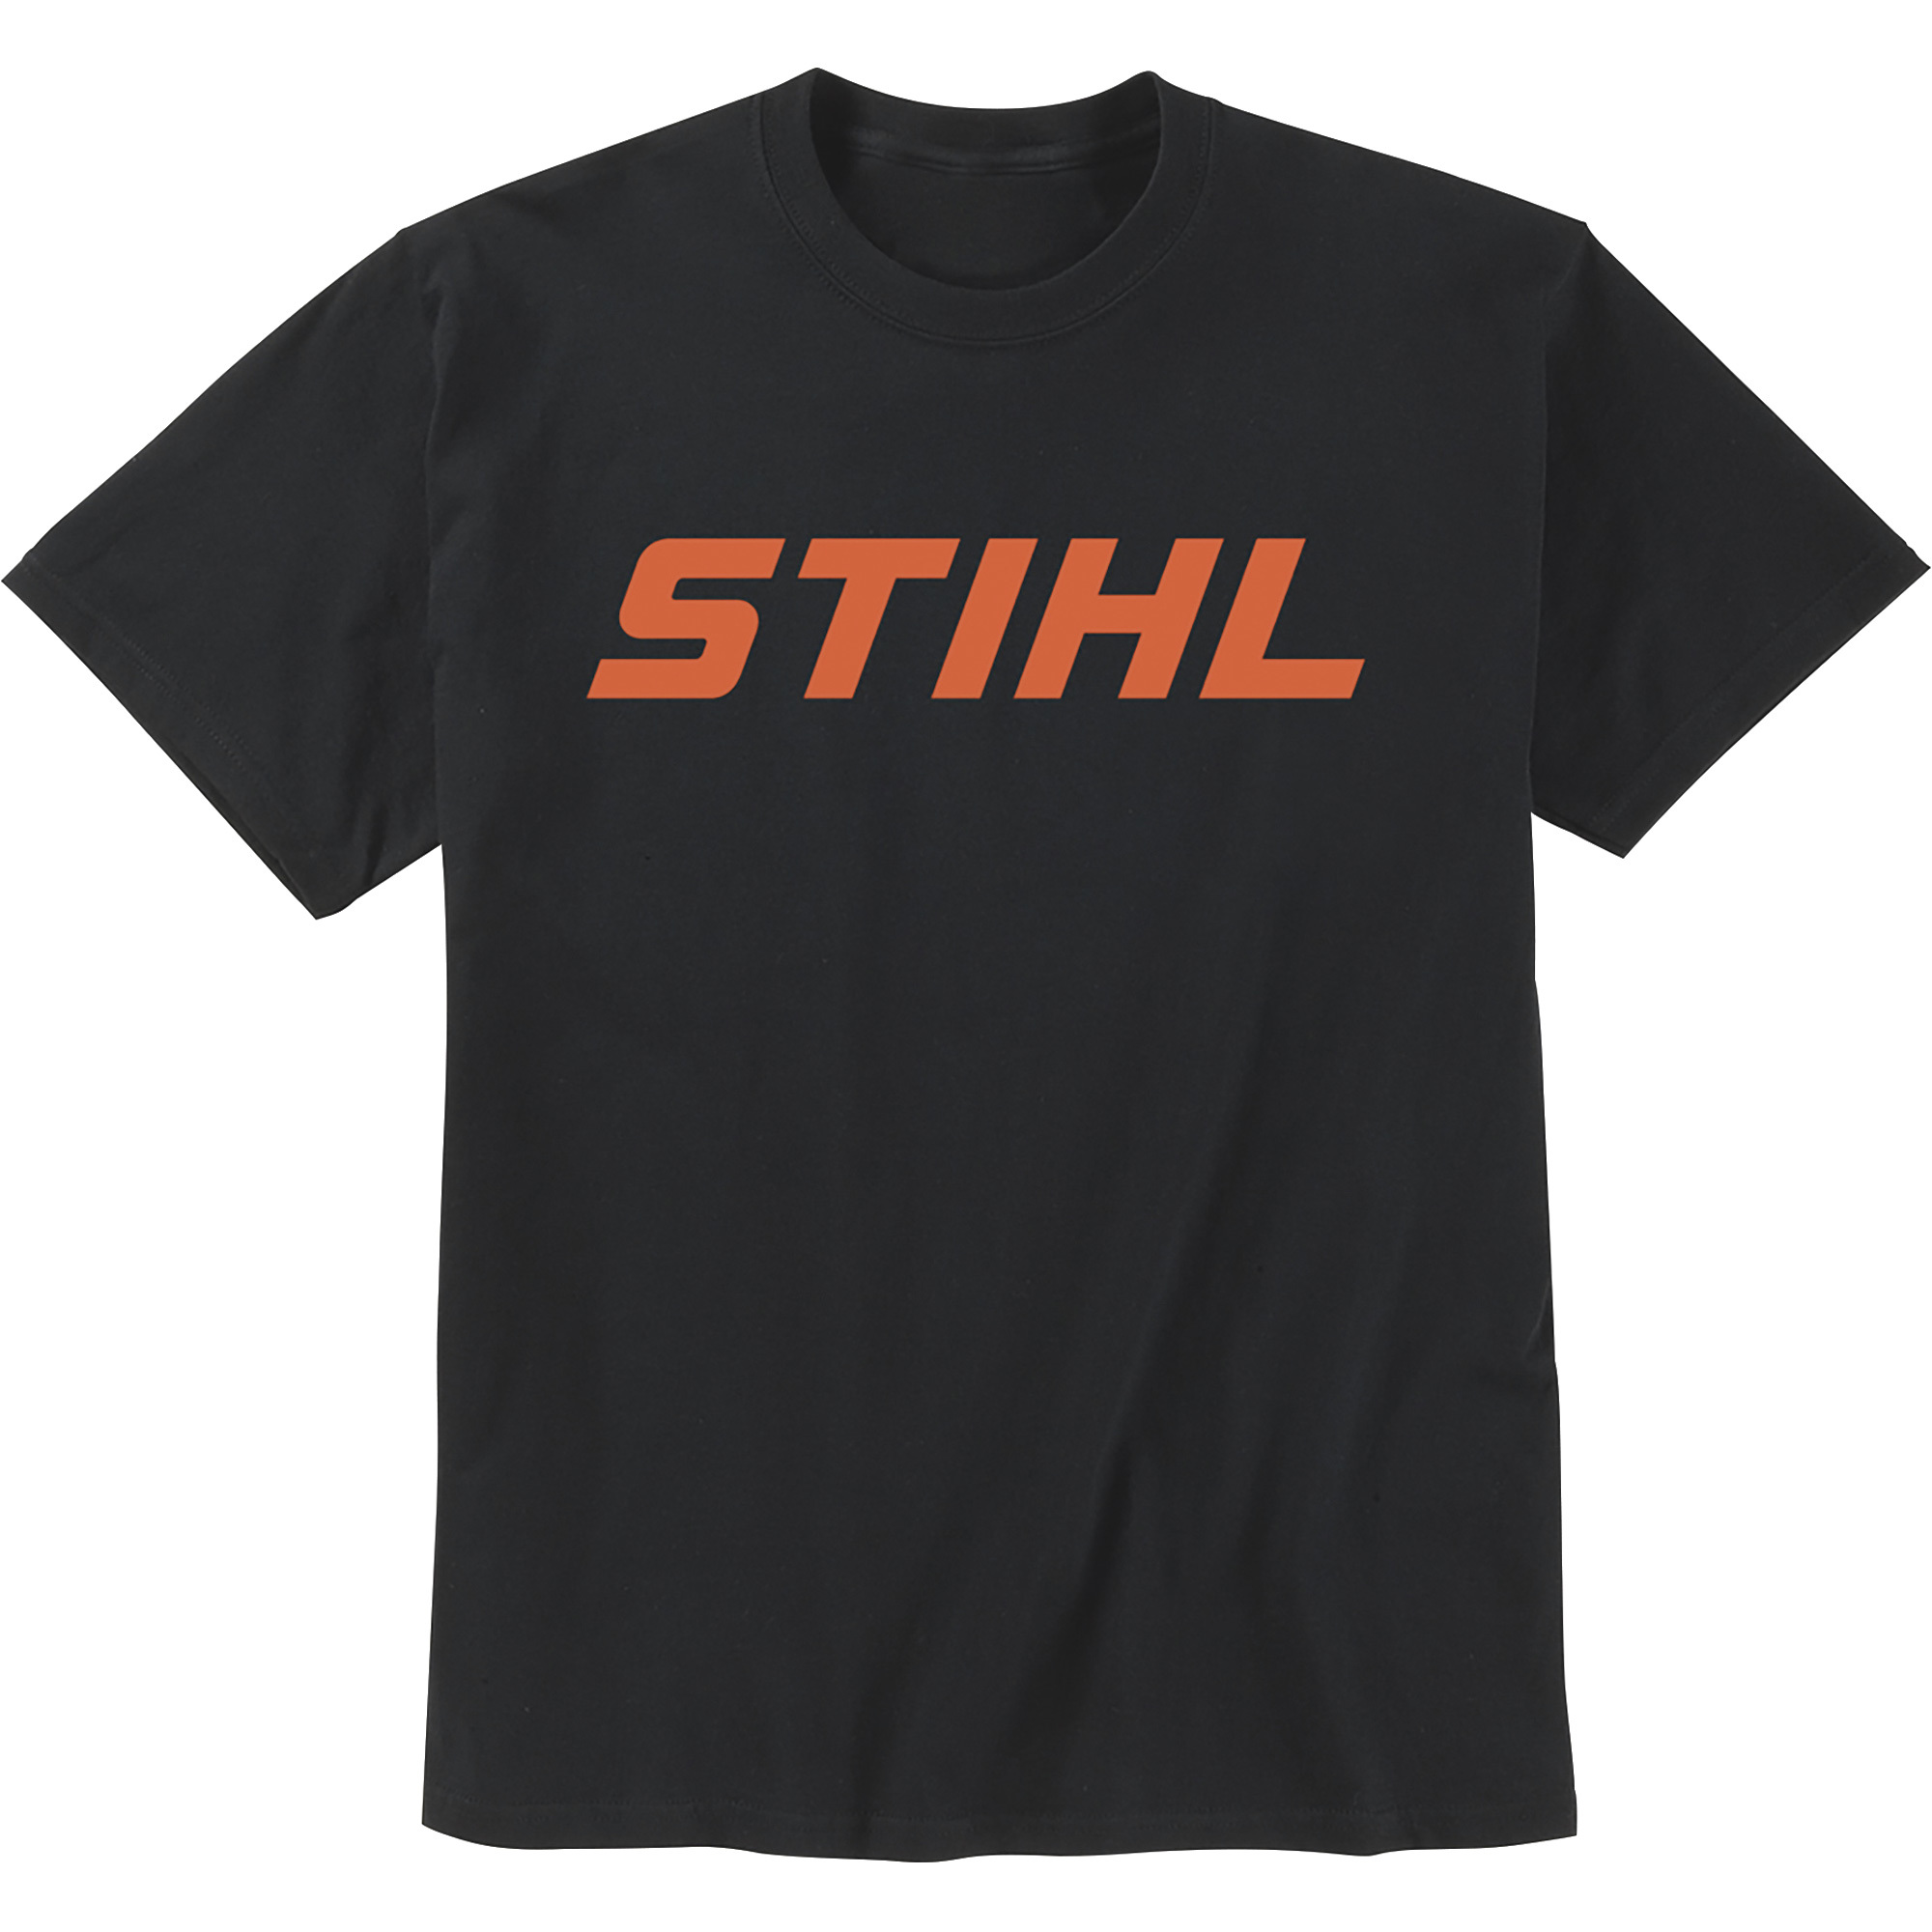 STIHL Outfitters Trademark T-Shirt â Black, XL